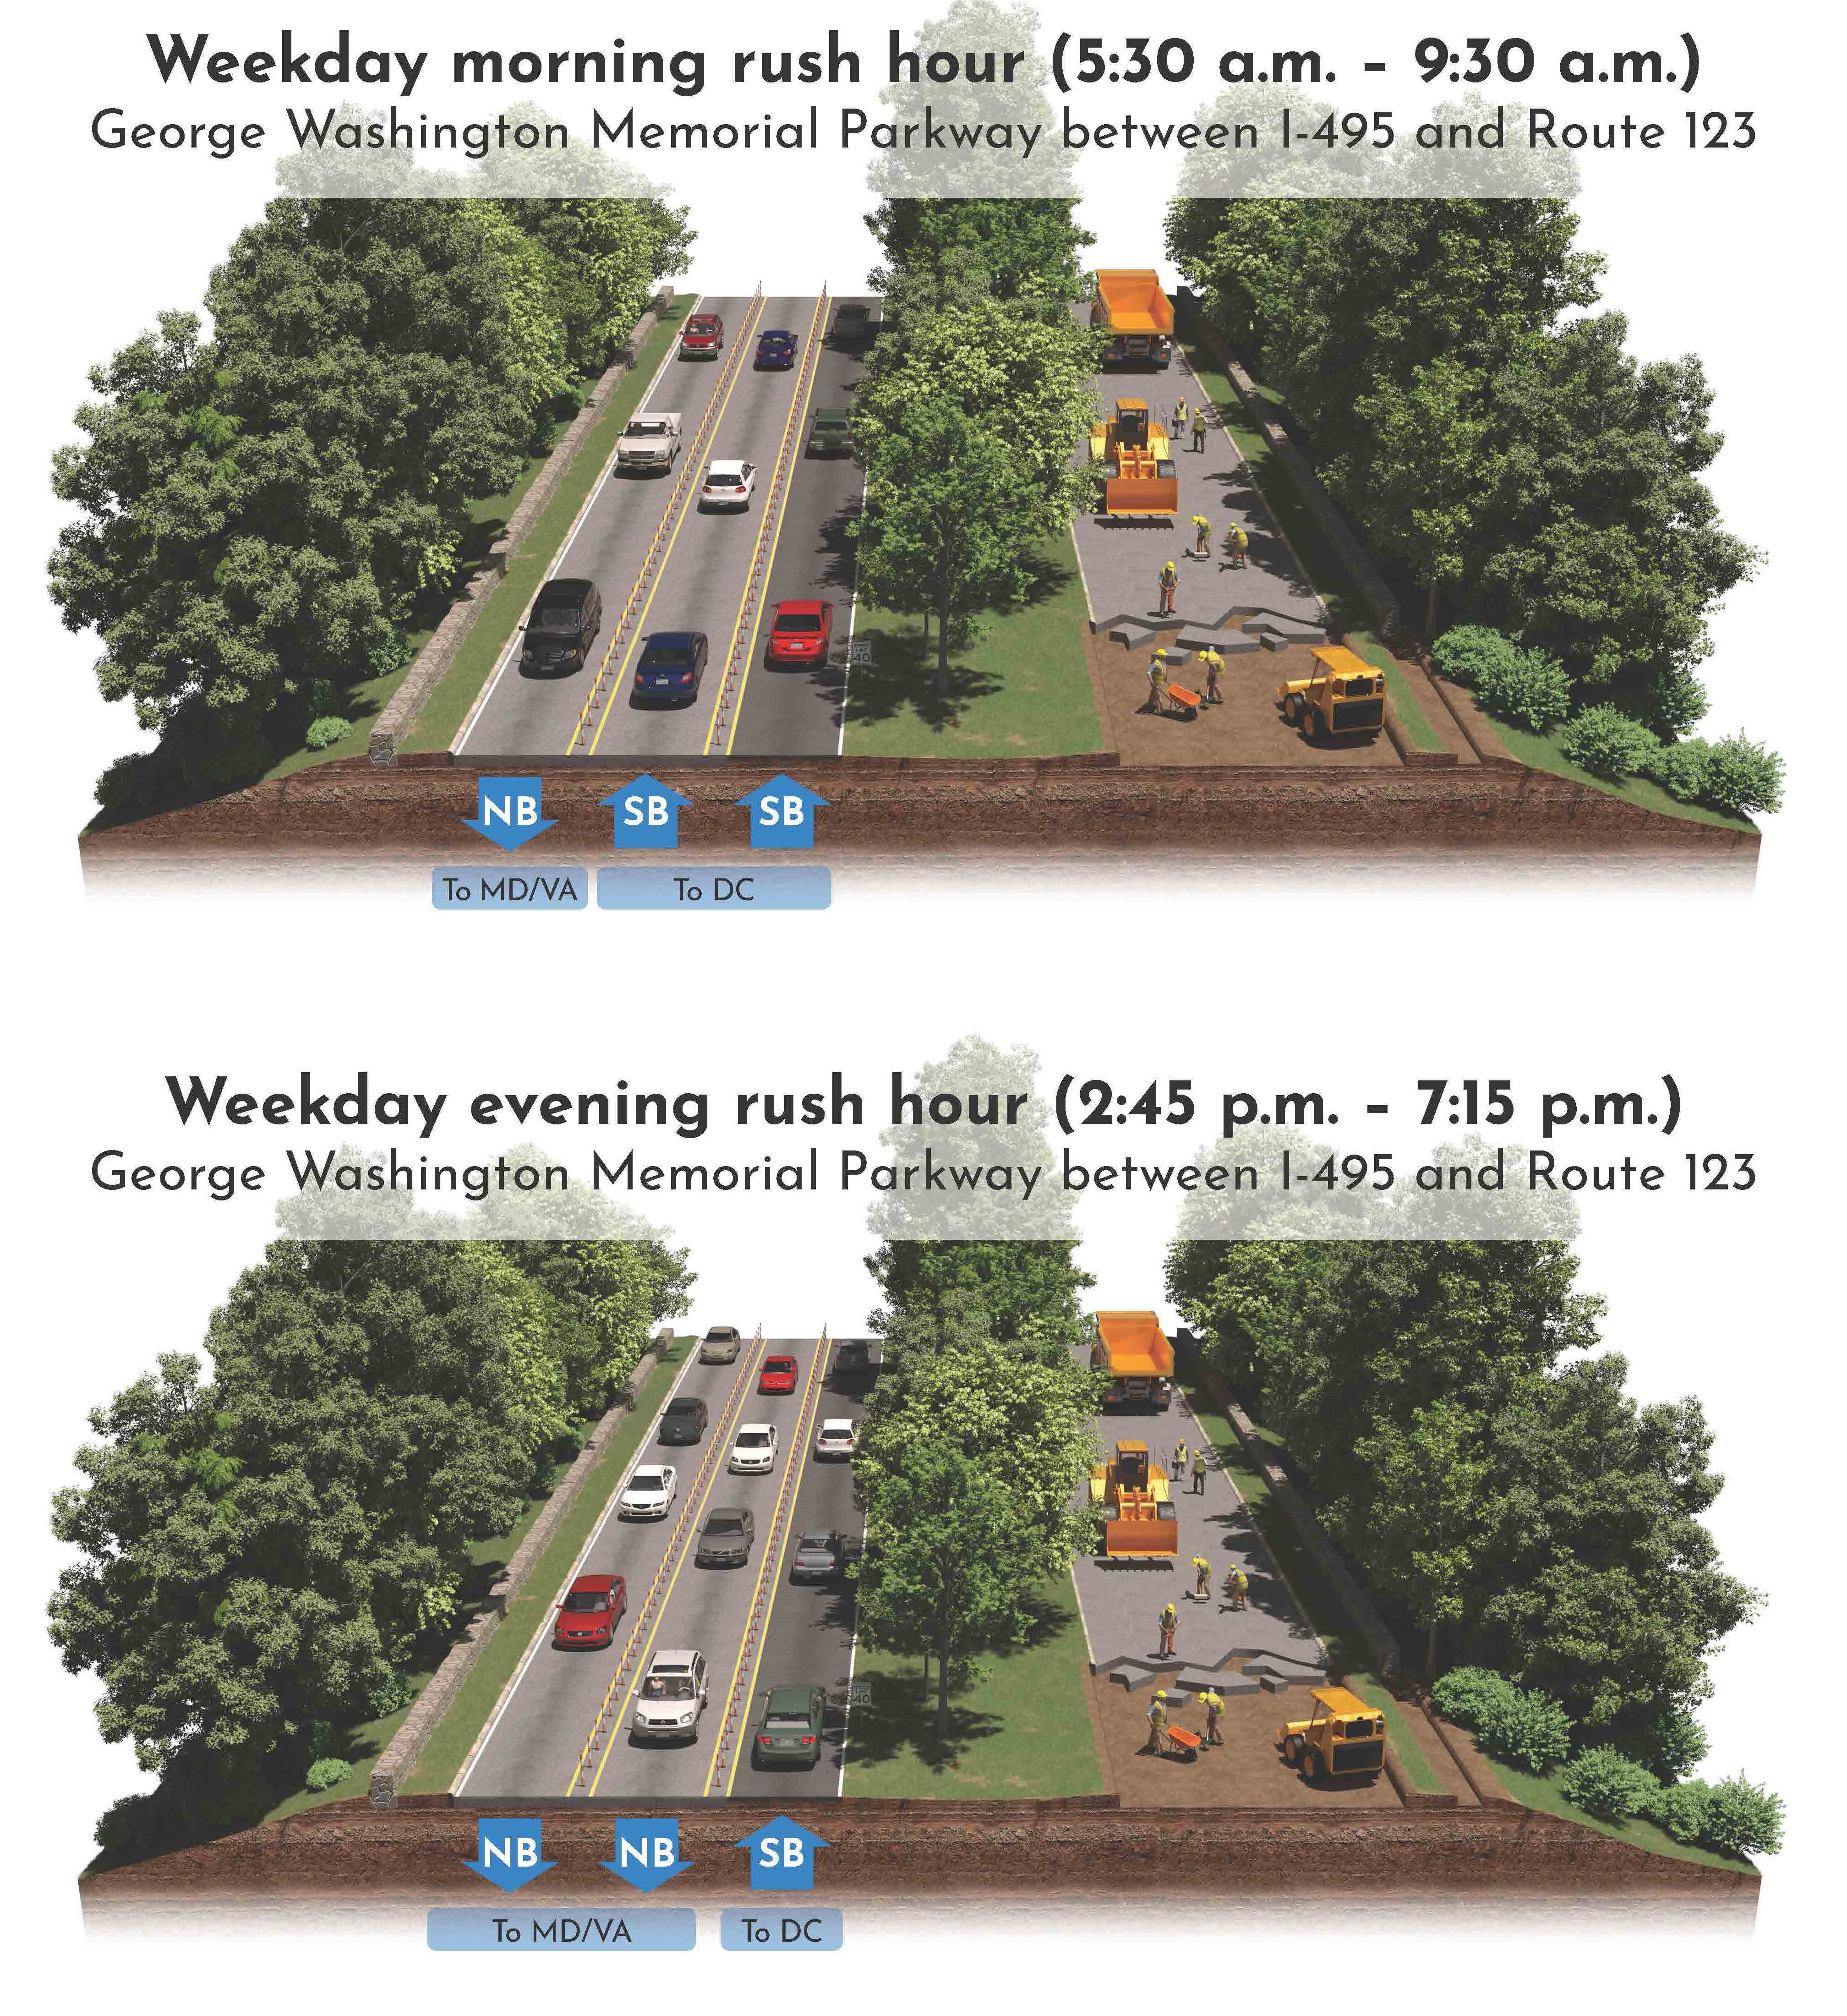 Two images that depict the work happening in the southbound lanes while traffic moves in the northbound lanes.